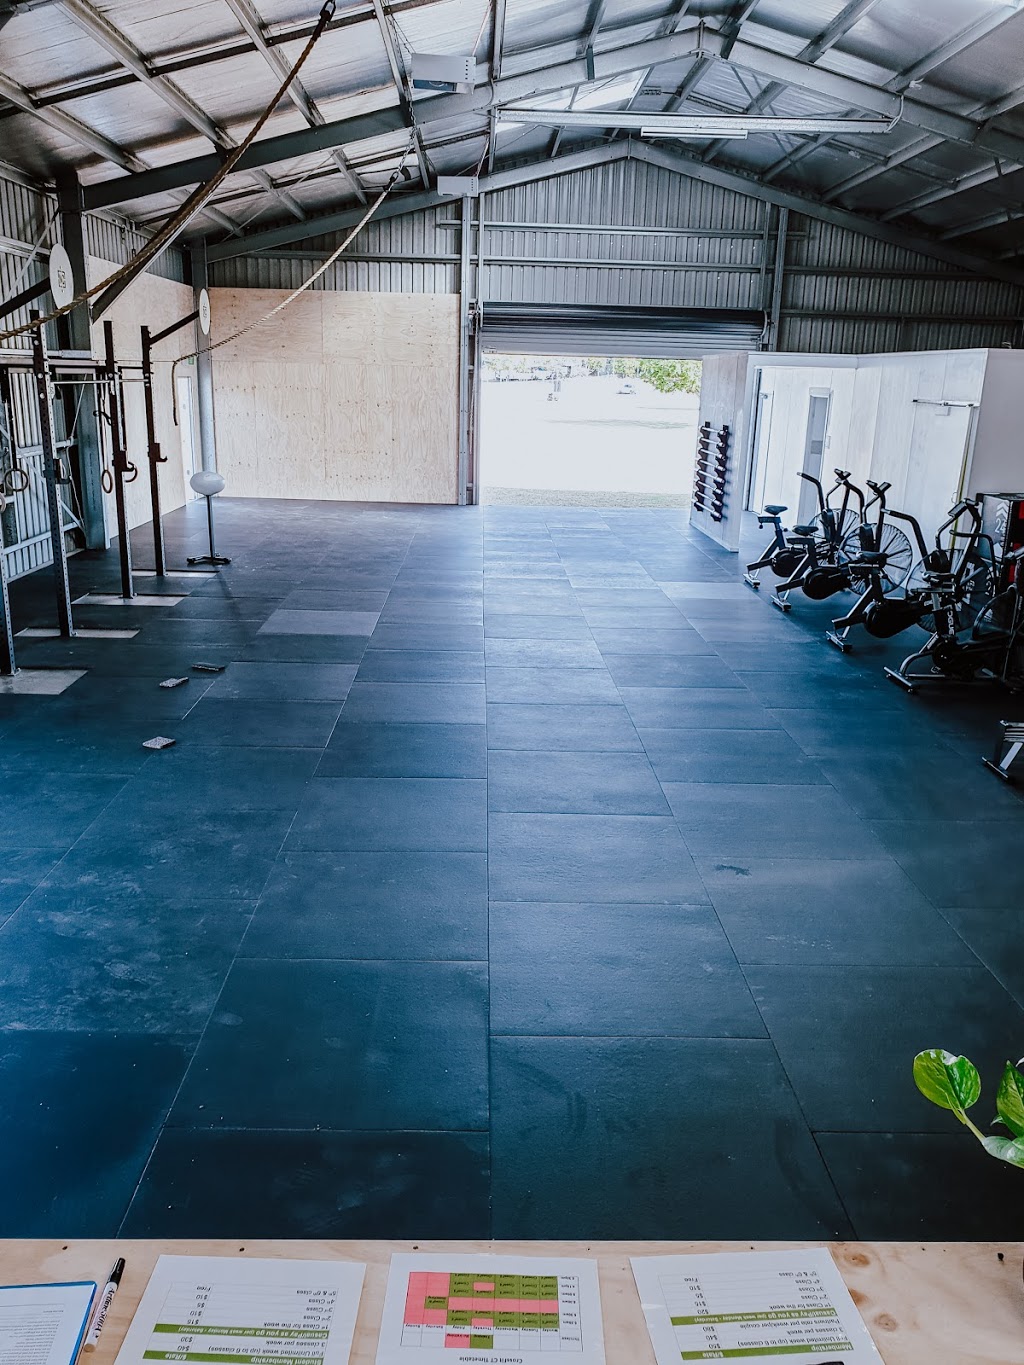 CrossFit CT | gym | 14 Boundary St, Charters Towers City QLD 4820, Australia | 0447971421 OR +61 447 971 421